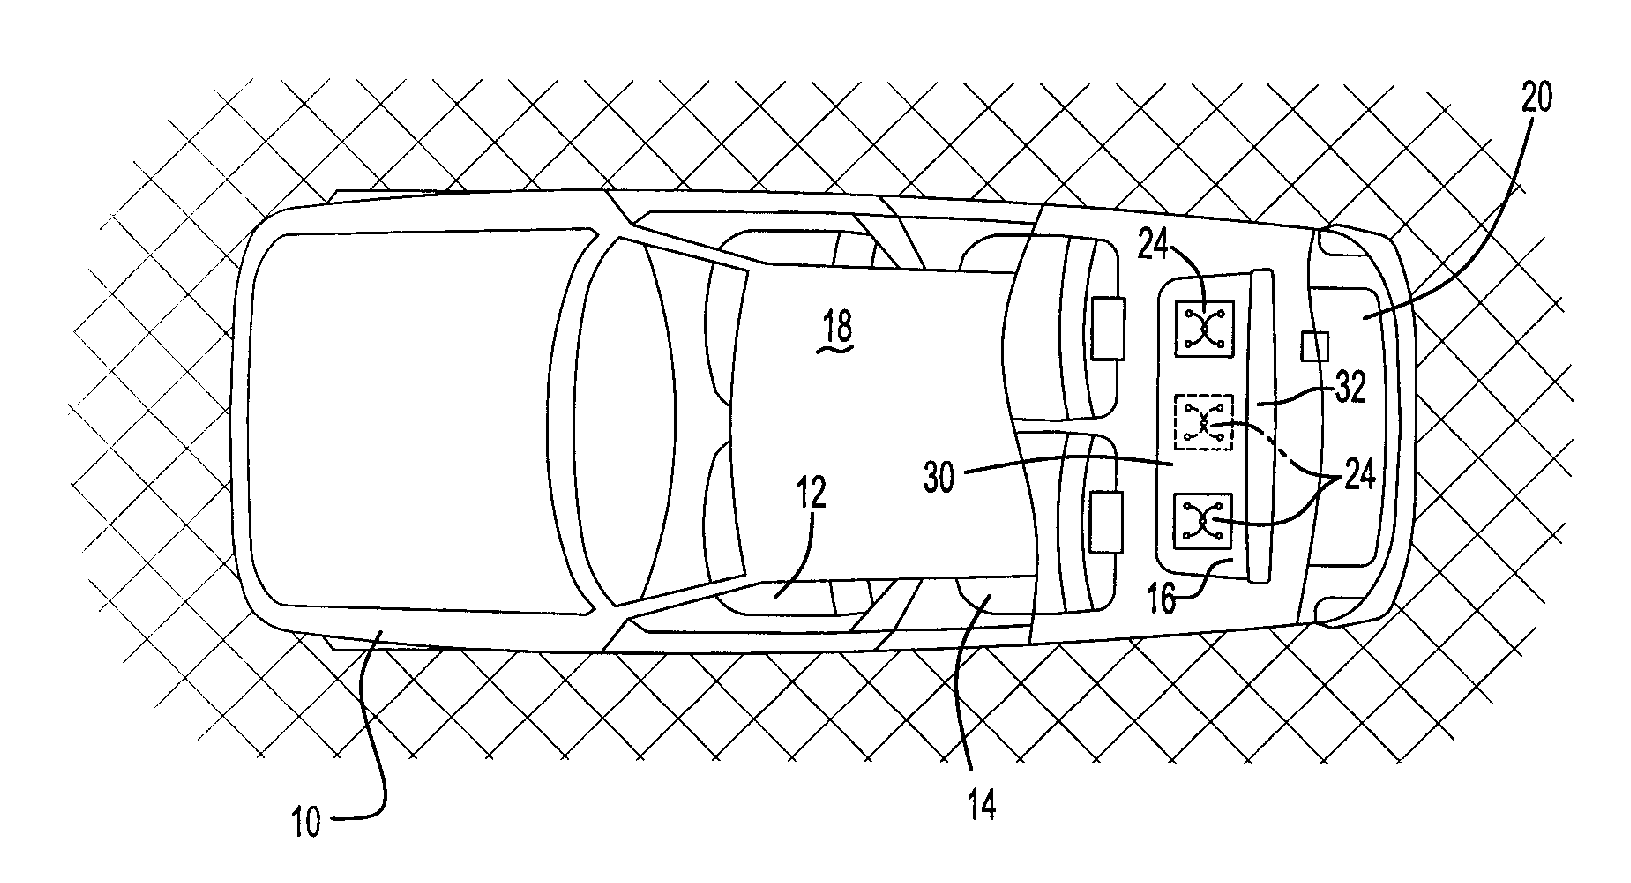 Seat folding apparatus with a passive radio frequency link and foreign object detection system